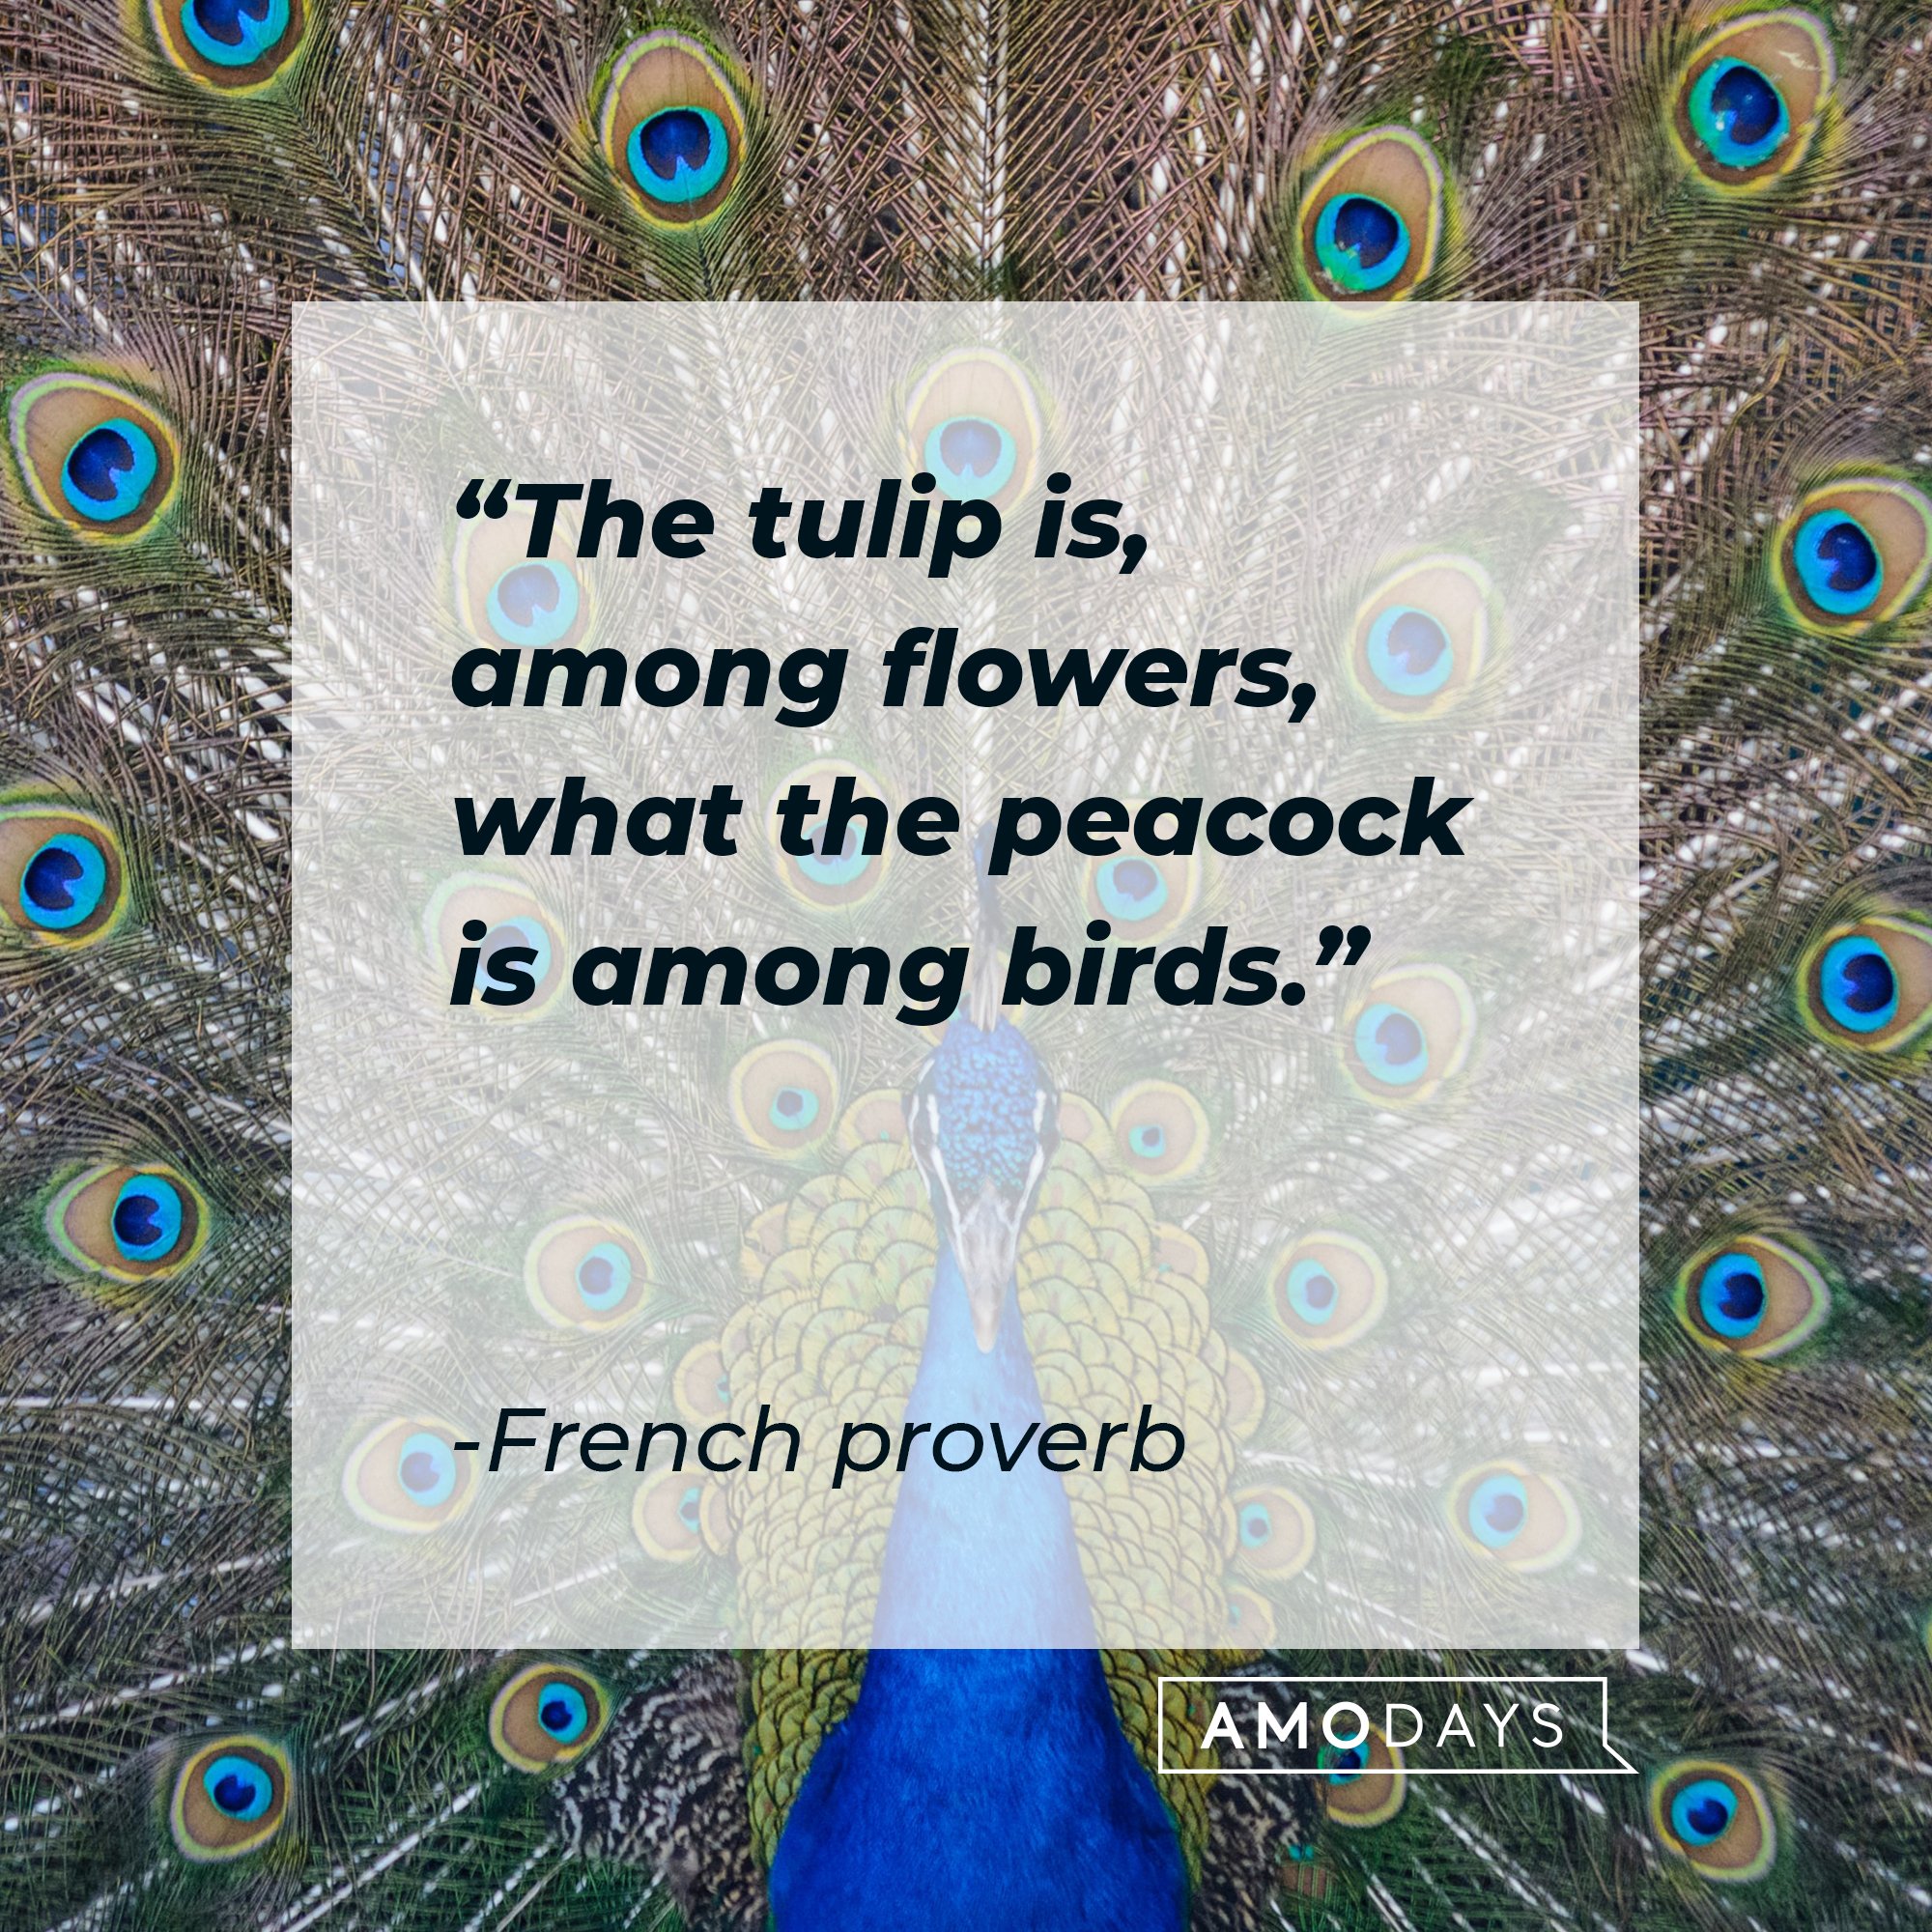 A quote from a French proverb: "The tulip is, among flowers, what the peacock is among birds." | Image: AmoDays